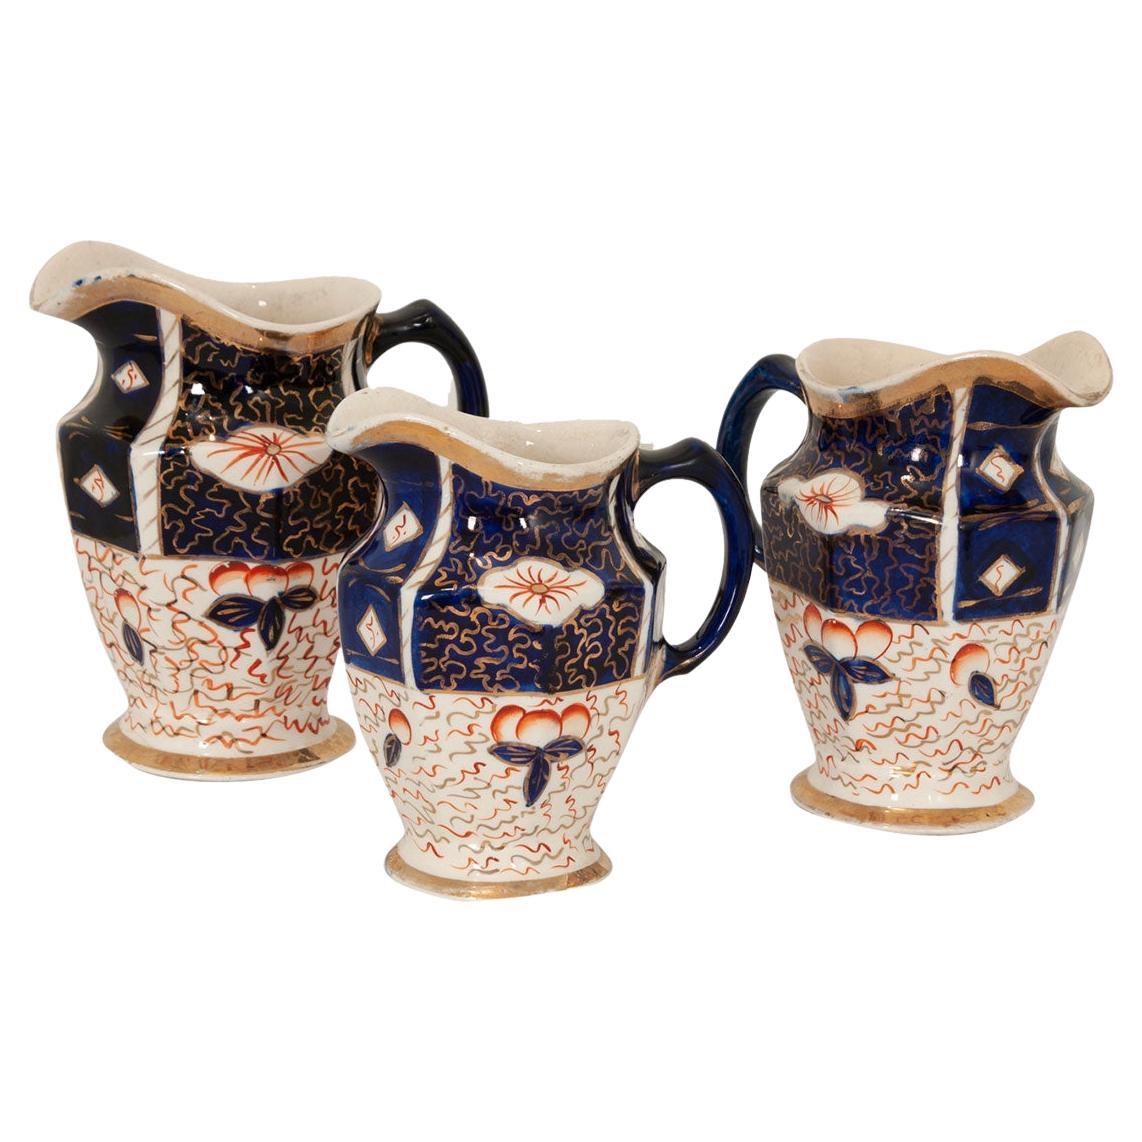 Collection of Three 19th Century Aesthetic Movement Pitchers